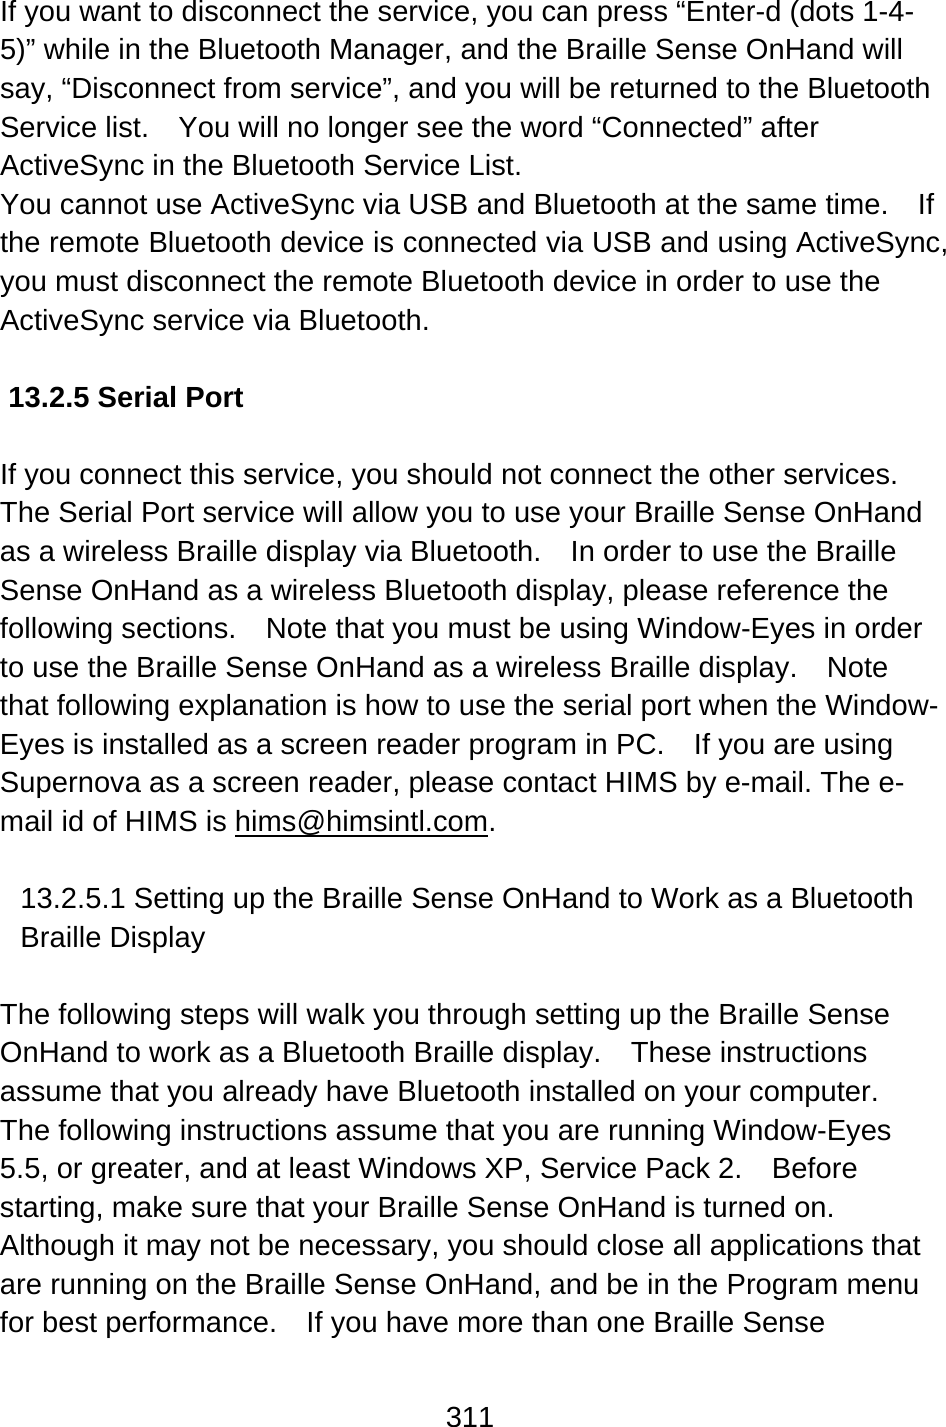 311  If you want to disconnect the service, you can press “Enter-d (dots 1-4-5)” while in the Bluetooth Manager, and the Braille Sense OnHand will say, “Disconnect from service”, and you will be returned to the Bluetooth Service list.    You will no longer see the word “Connected” after ActiveSync in the Bluetooth Service List. You cannot use ActiveSync via USB and Bluetooth at the same time.    If the remote Bluetooth device is connected via USB and using ActiveSync, you must disconnect the remote Bluetooth device in order to use the ActiveSync service via Bluetooth.  13.2.5 Serial Port  If you connect this service, you should not connect the other services.   The Serial Port service will allow you to use your Braille Sense OnHand as a wireless Braille display via Bluetooth.    In order to use the Braille Sense OnHand as a wireless Bluetooth display, please reference the following sections.  Note that you must be using Window-Eyes in order to use the Braille Sense OnHand as a wireless Braille display.    Note that following explanation is how to use the serial port when the Window-Eyes is installed as a screen reader program in PC.    If you are using Supernova as a screen reader, please contact HIMS by e-mail. The e-mail id of HIMS is hims@himsintl.com.  13.2.5.1 Setting up the Braille Sense OnHand to Work as a Bluetooth Braille Display  The following steps will walk you through setting up the Braille Sense OnHand to work as a Bluetooth Braille display.  These instructions assume that you already have Bluetooth installed on your computer.   The following instructions assume that you are running Window-Eyes 5.5, or greater, and at least Windows XP, Service Pack 2.    Before starting, make sure that your Braille Sense OnHand is turned on.   Although it may not be necessary, you should close all applications that are running on the Braille Sense OnHand, and be in the Program menu for best performance.    If you have more than one Braille Sense 